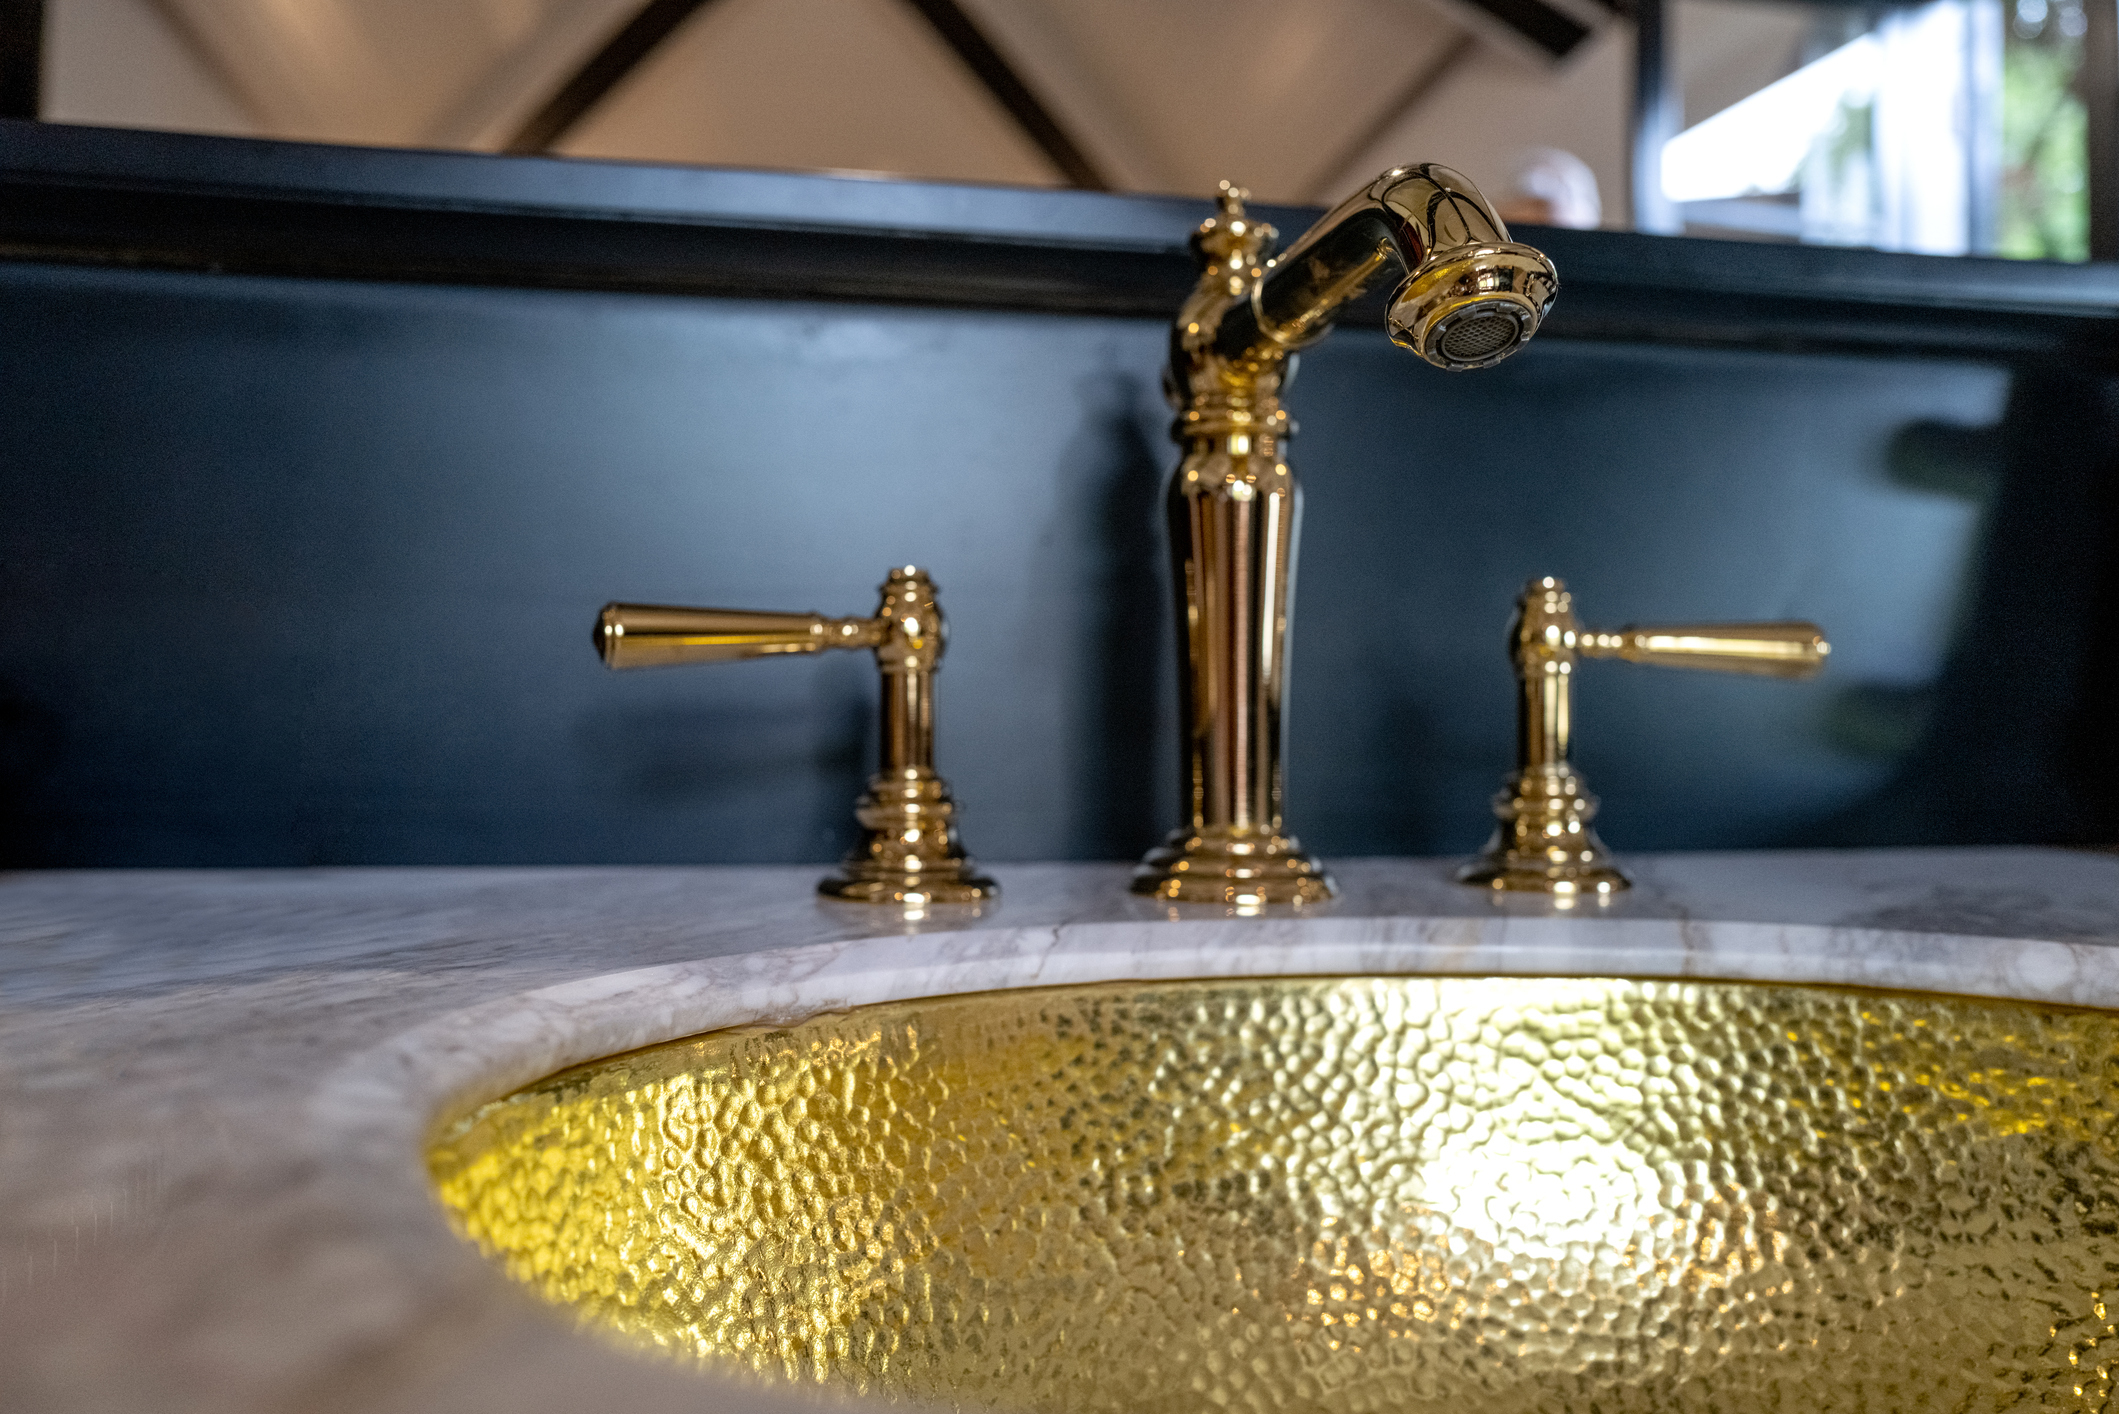 Brass faucet over a textured sink, reflecting light, set in a stone countertop